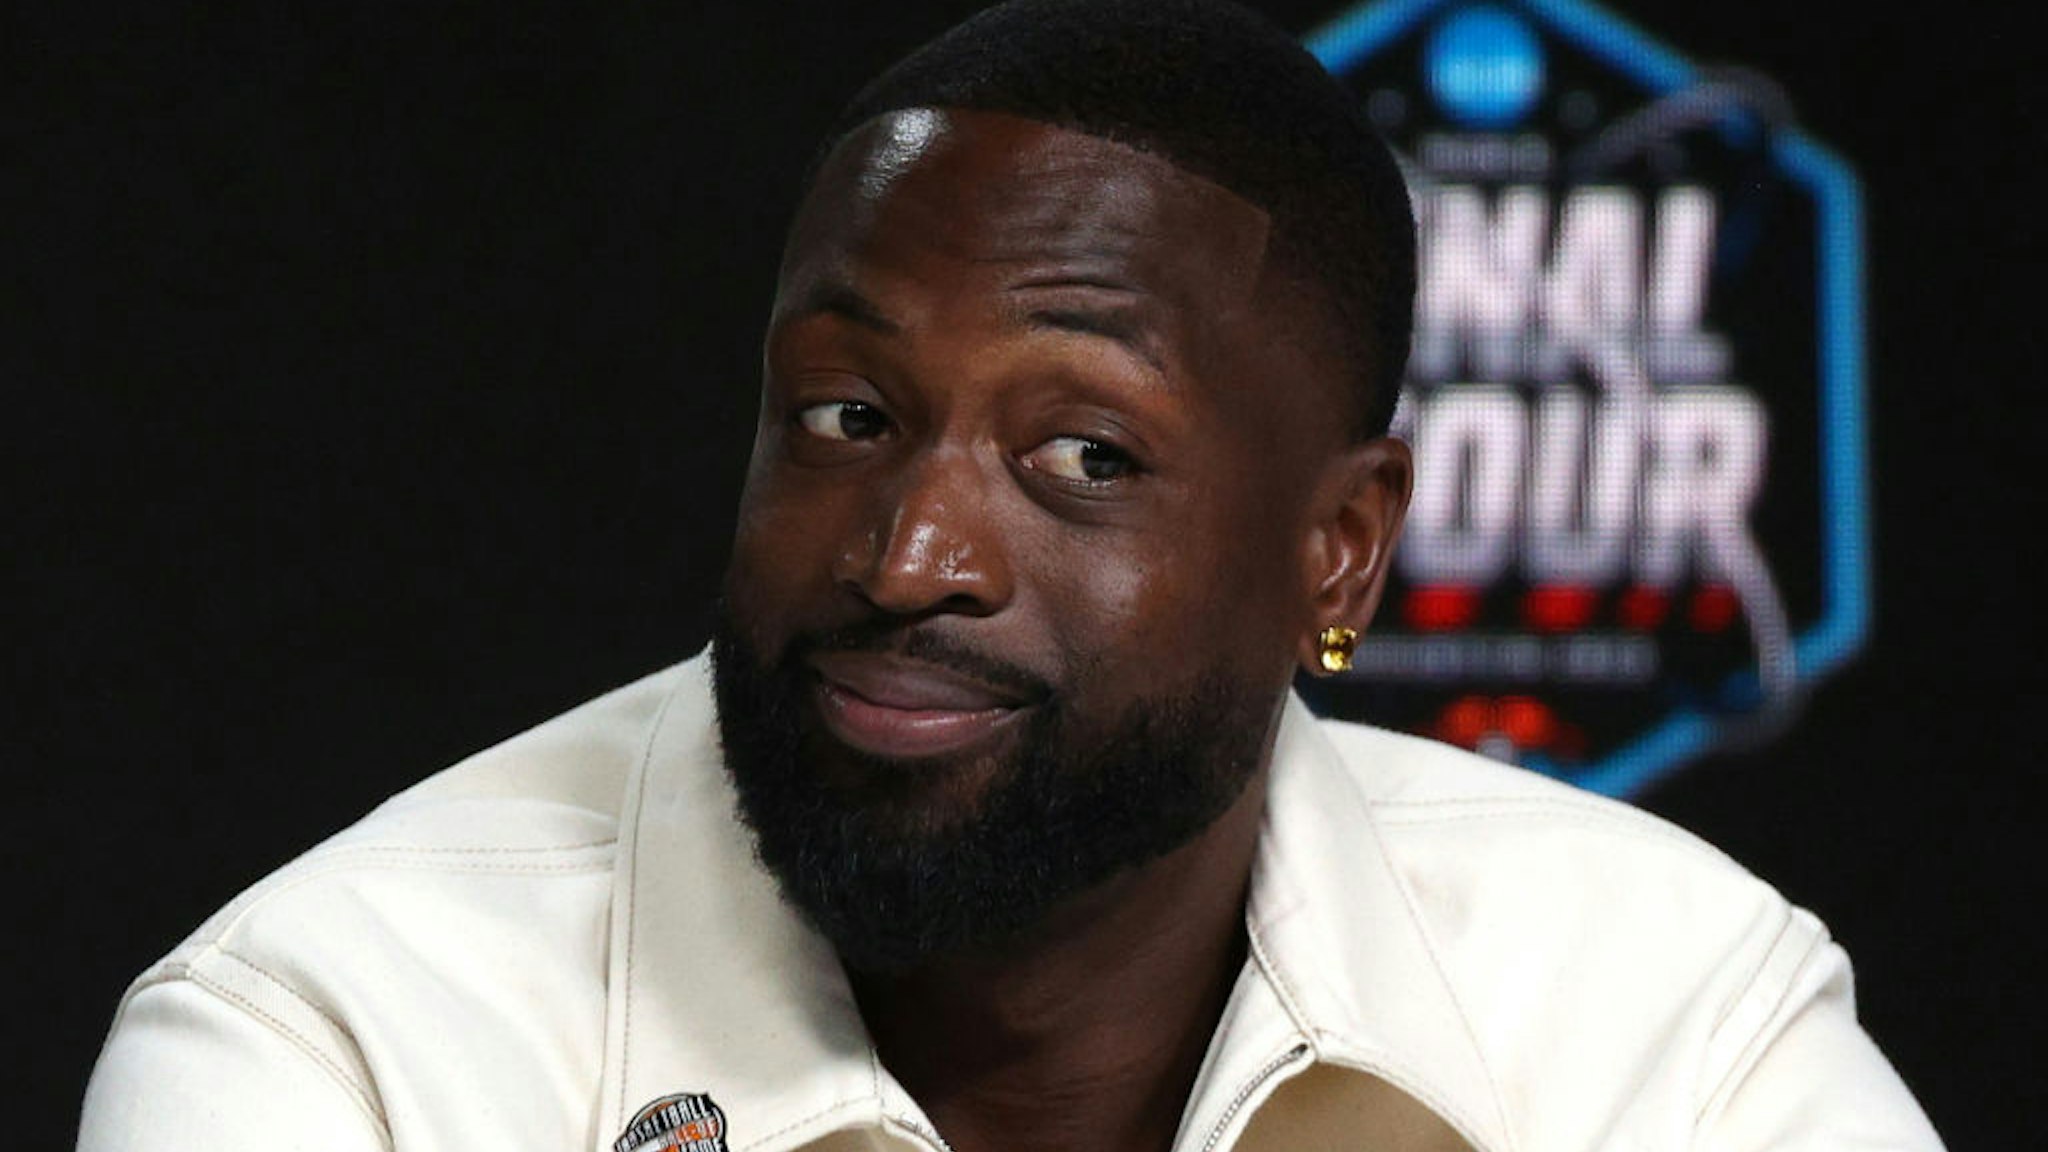 HOUSTON, TEXAS - APRIL 01: Inductee Dwyane Wade reacts during the 2023 Naismith Hall of Fame Press Conference at NRG Stadium on April 01, 2023 in Houston, Texas. (Photo by Mike Lawrie/Getty Images)